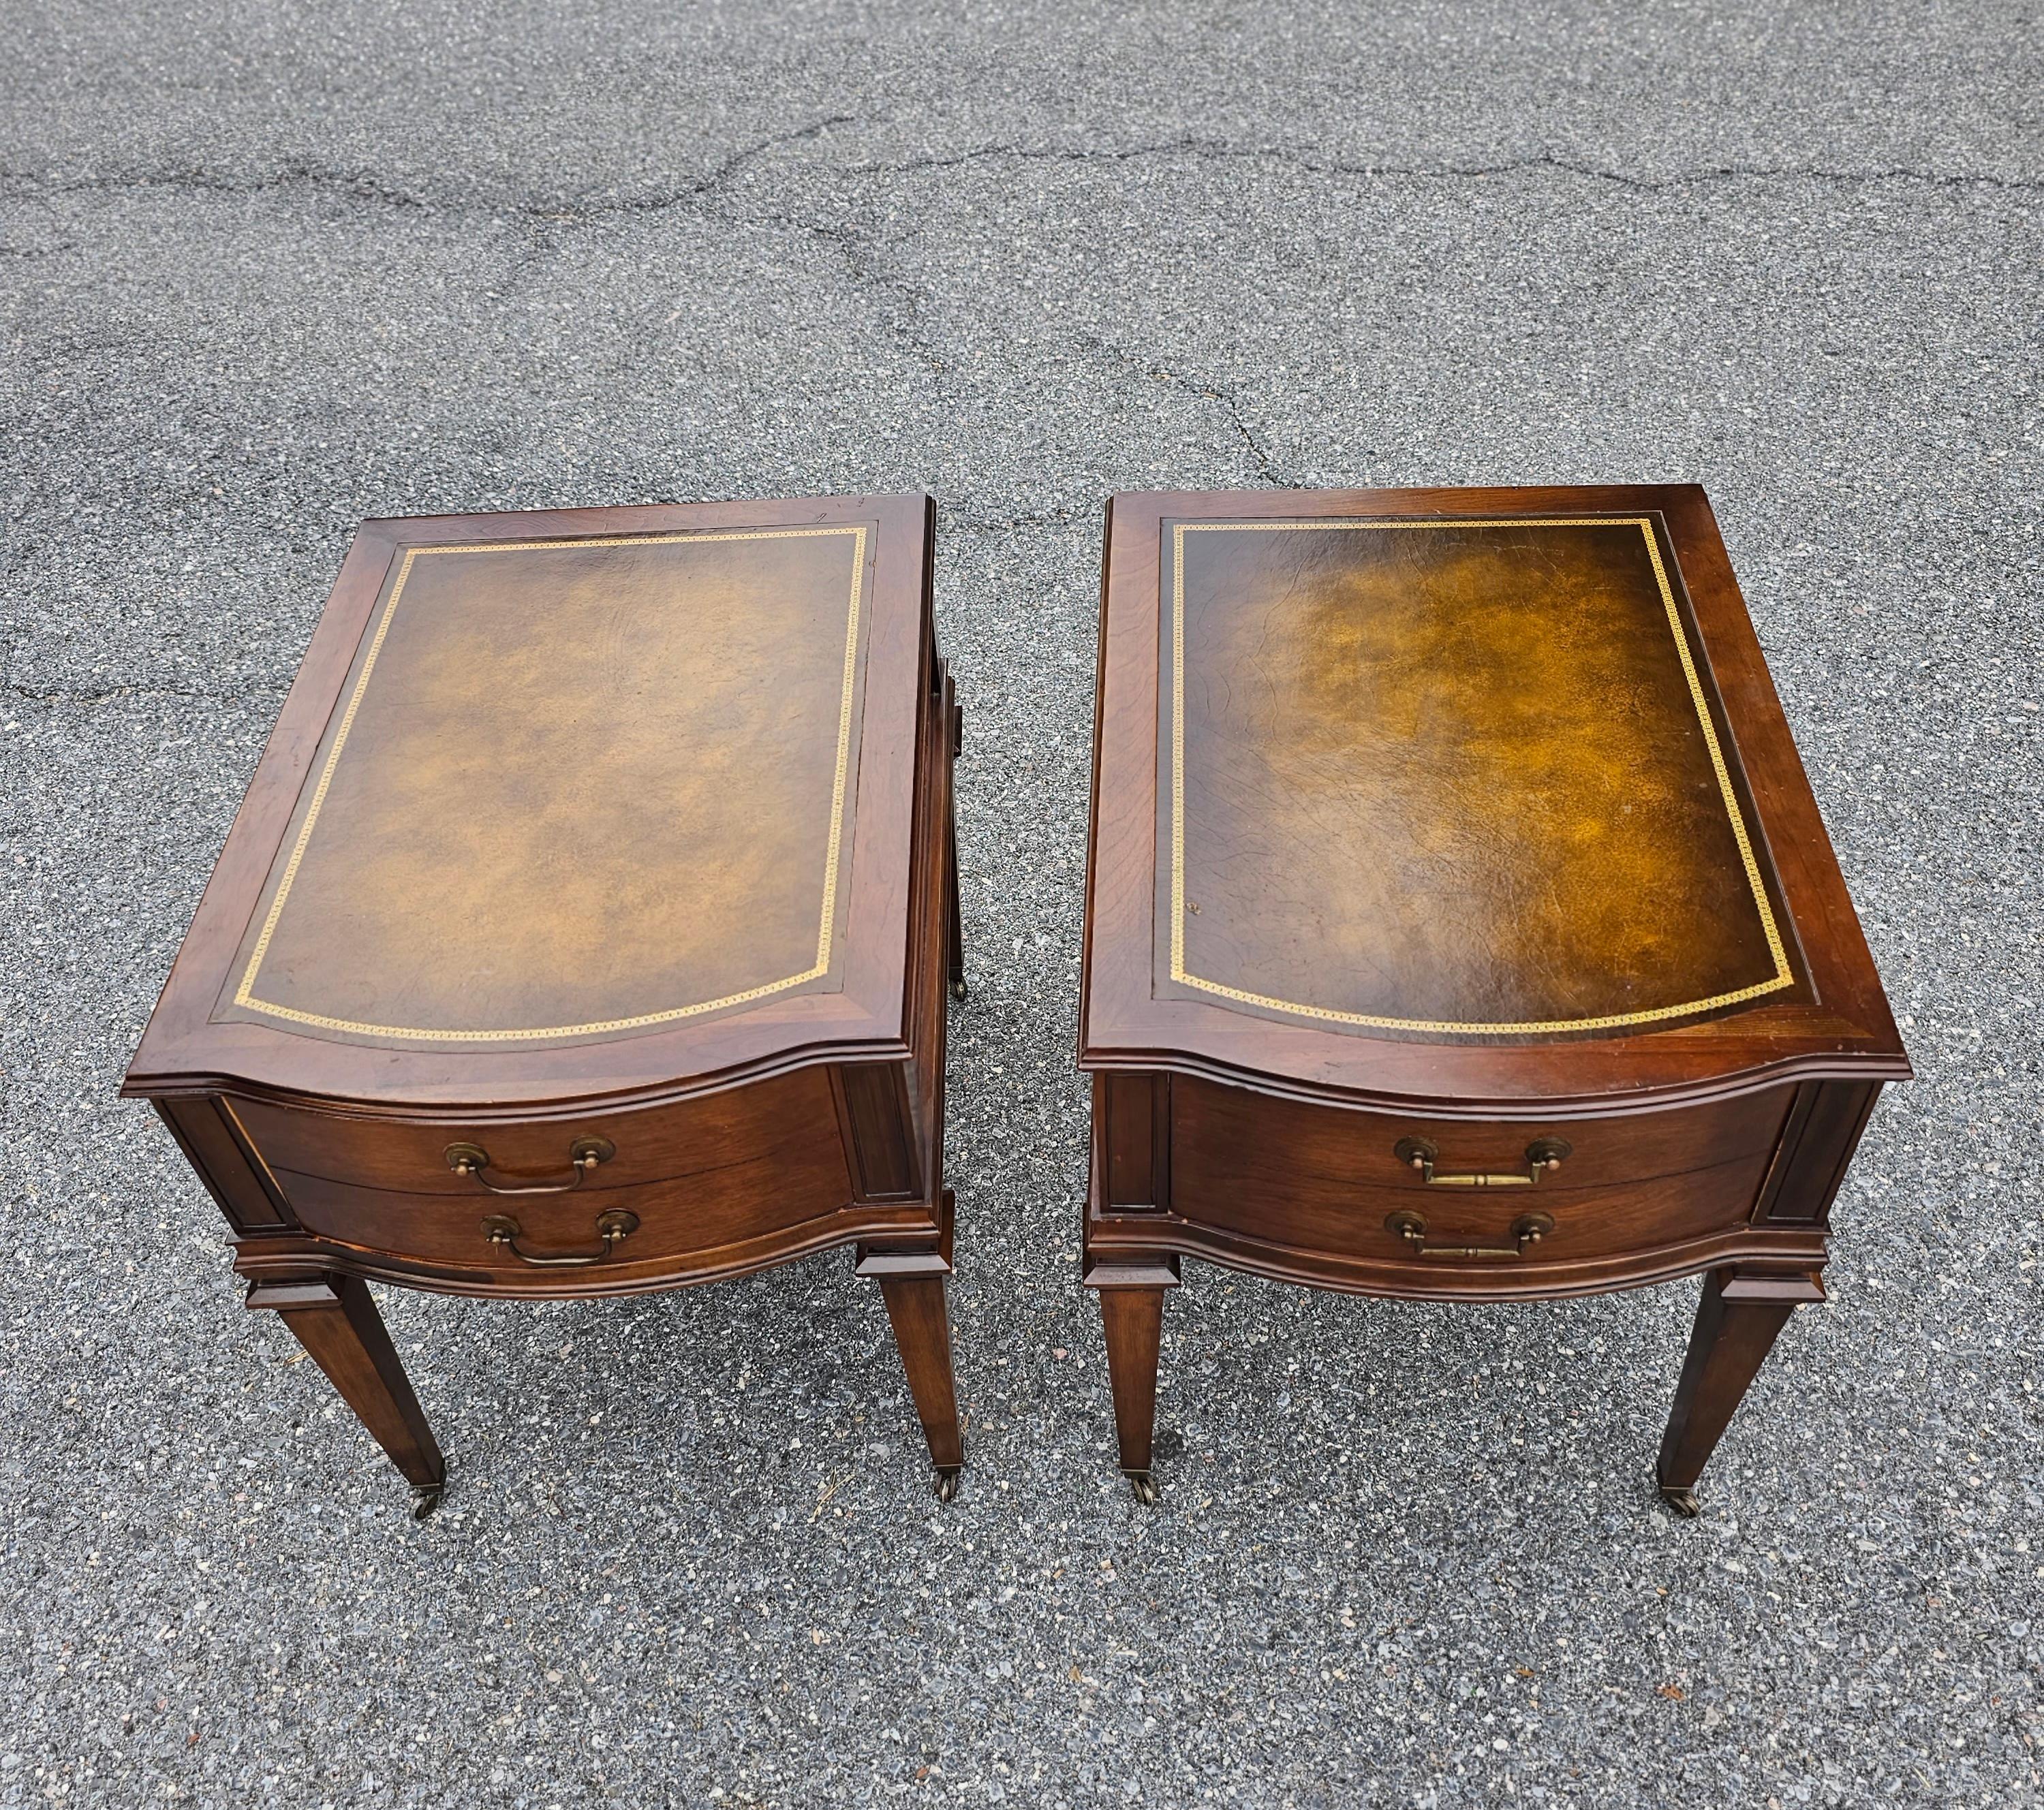 A pair of Mid-Century Hollywood Regency Mahogany and Stencil Tooled Leather Top Side Tables on original wheels, with one large single drawer. Measure 19